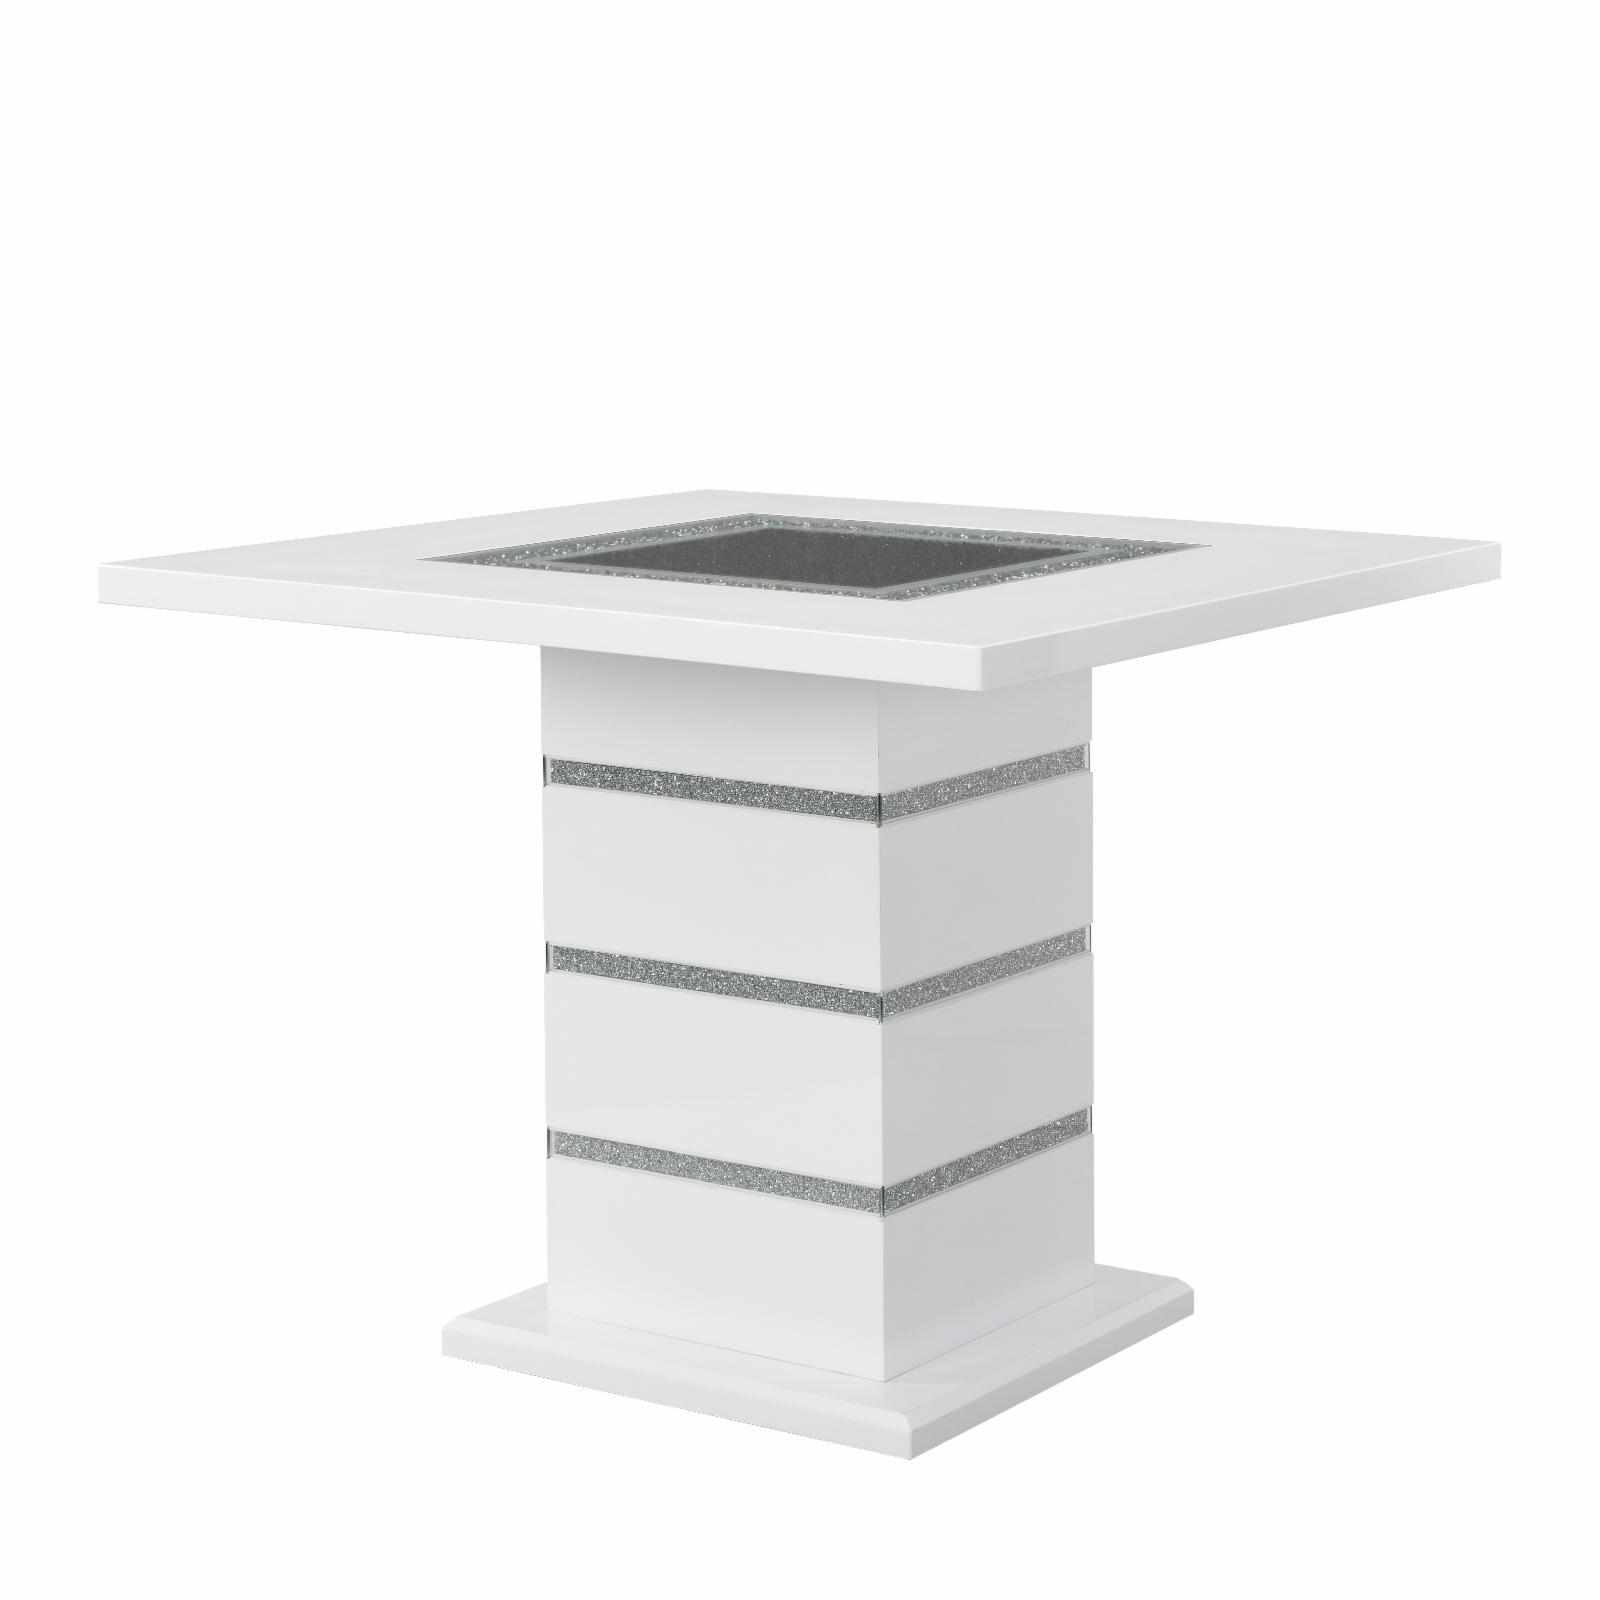 Elizaveta 47" Square High Gloss Counter Height Table with Faux Crystal